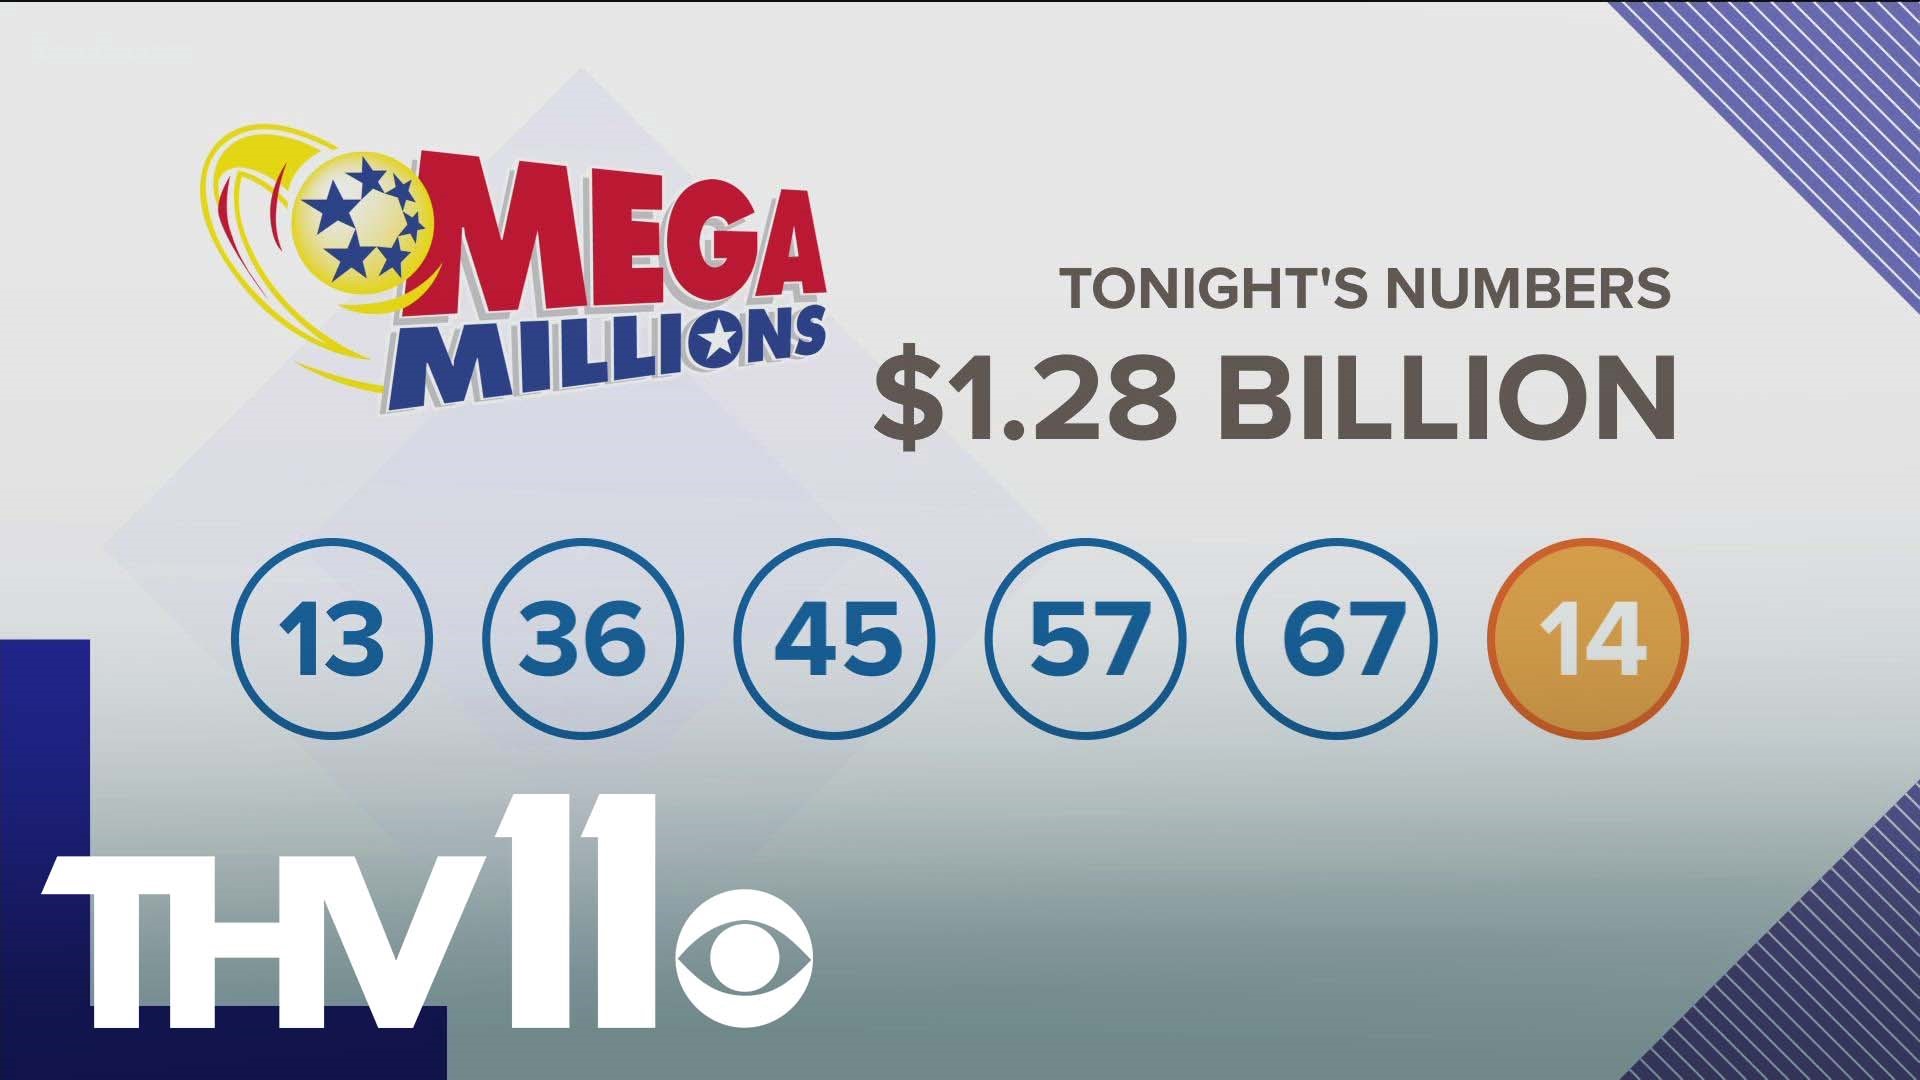 The winning Mega Millions numbers for the $1.28 billion are 13, 36, 45, 57, 67, and 14.